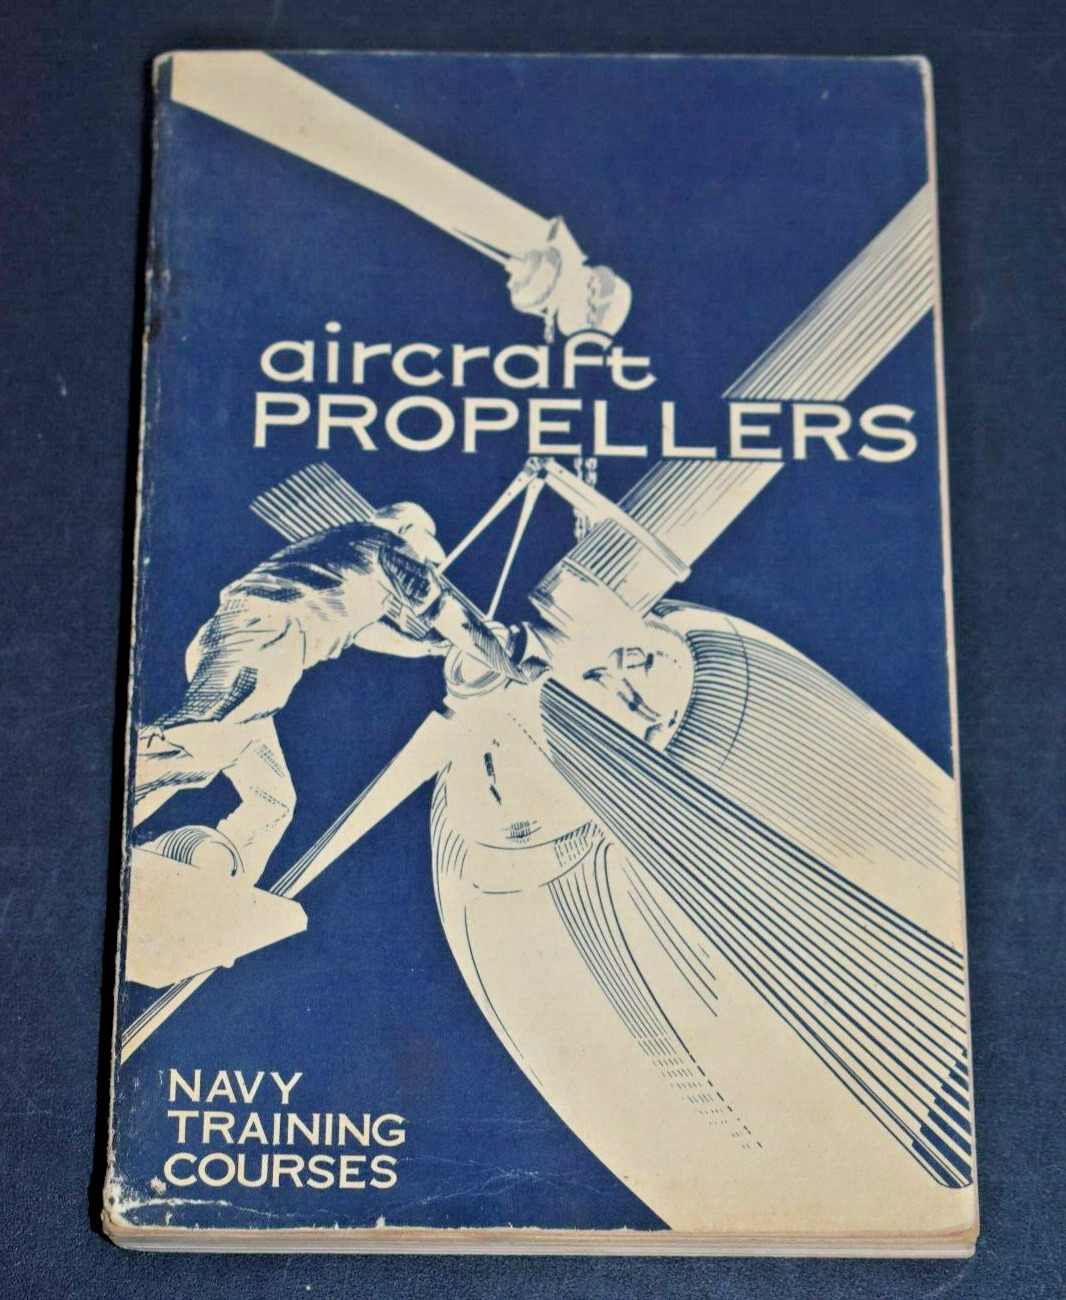 Vintage 1954 Aircraft Propellers Navy Training Courses Paperback Book NAVPERS